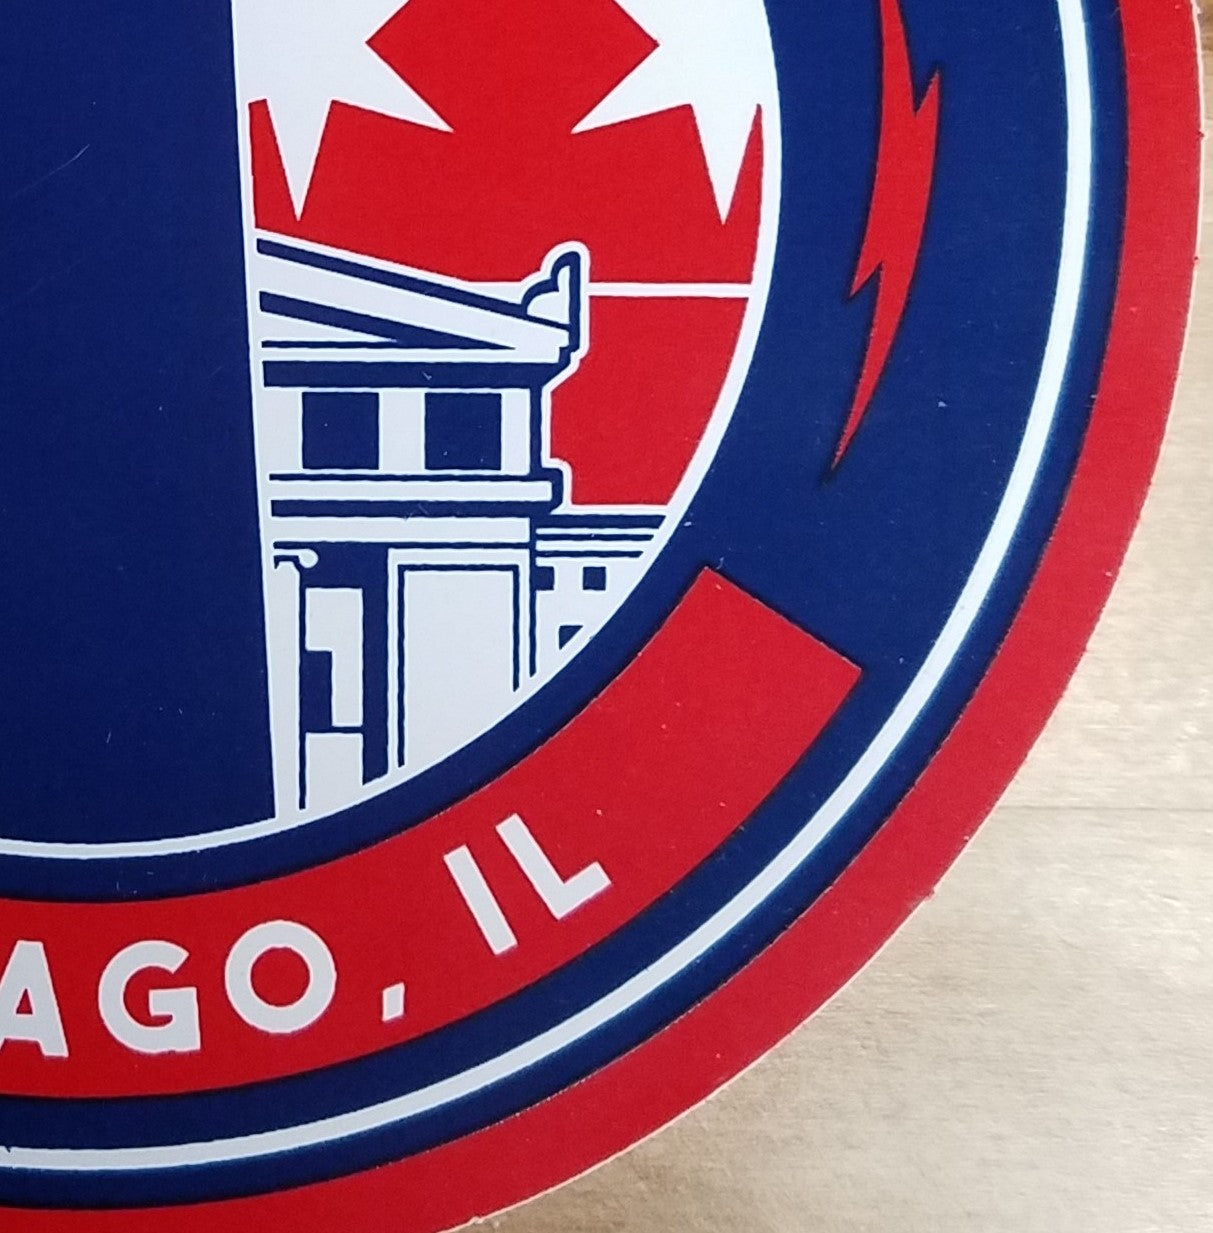 Title: Pearl Jam Wrigley Field Sticker Type: Sticker Size: 4" x 4" Notes: Purchased from the Pearl Jam Merch Tent outside of Wrigley field on August 16, 2018